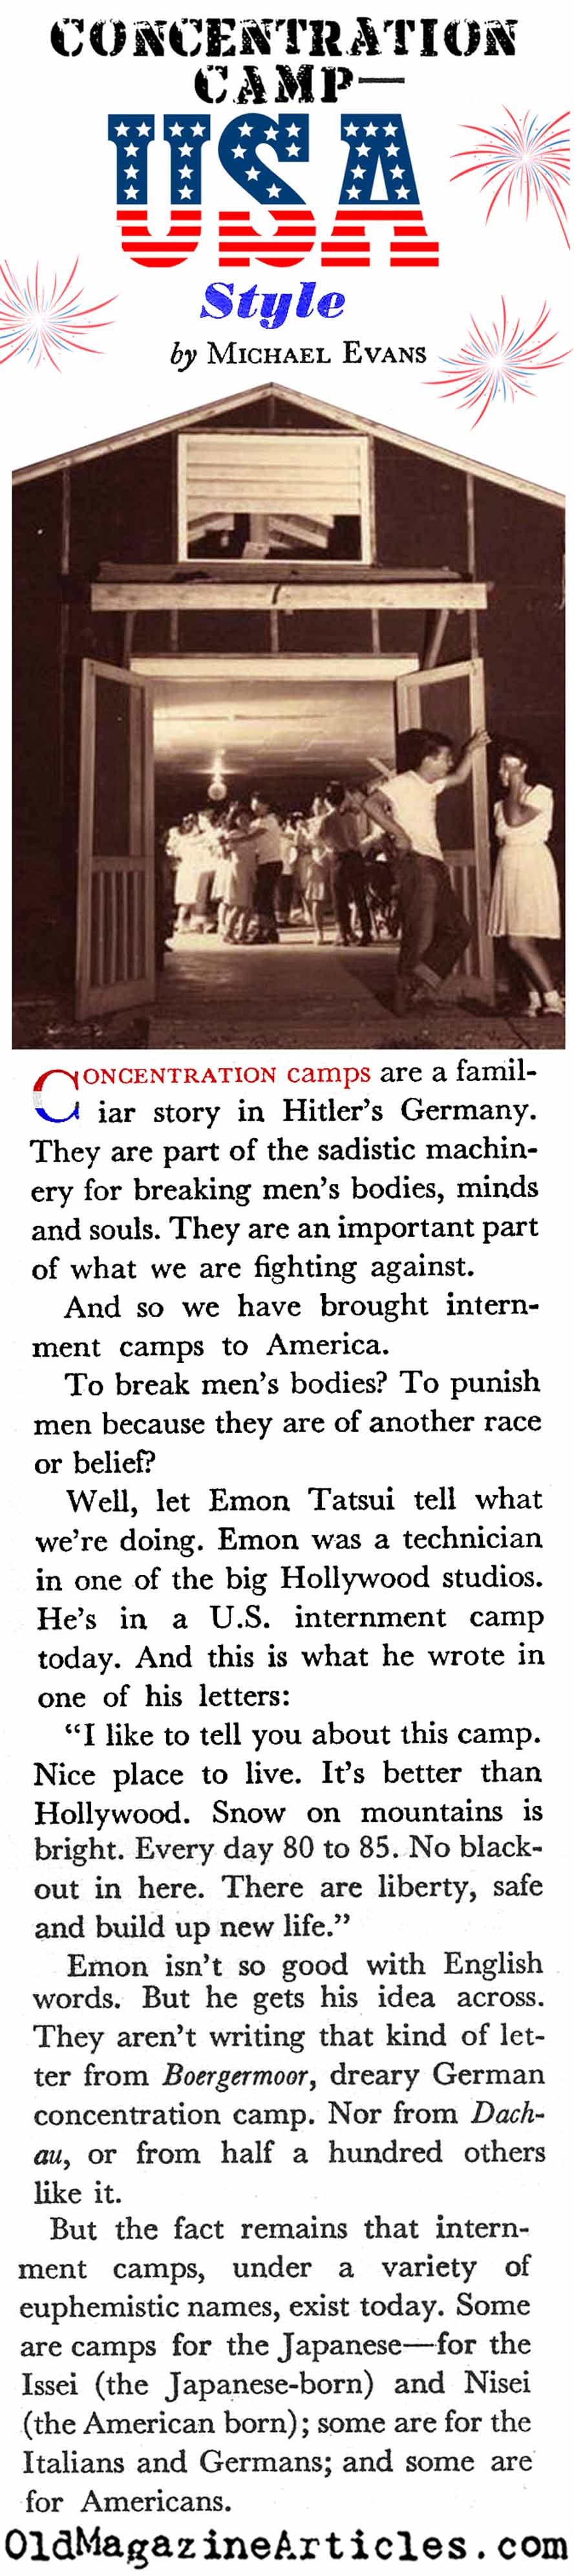 An American-Style Concentration Camp (Coronet Magazine, 1942)